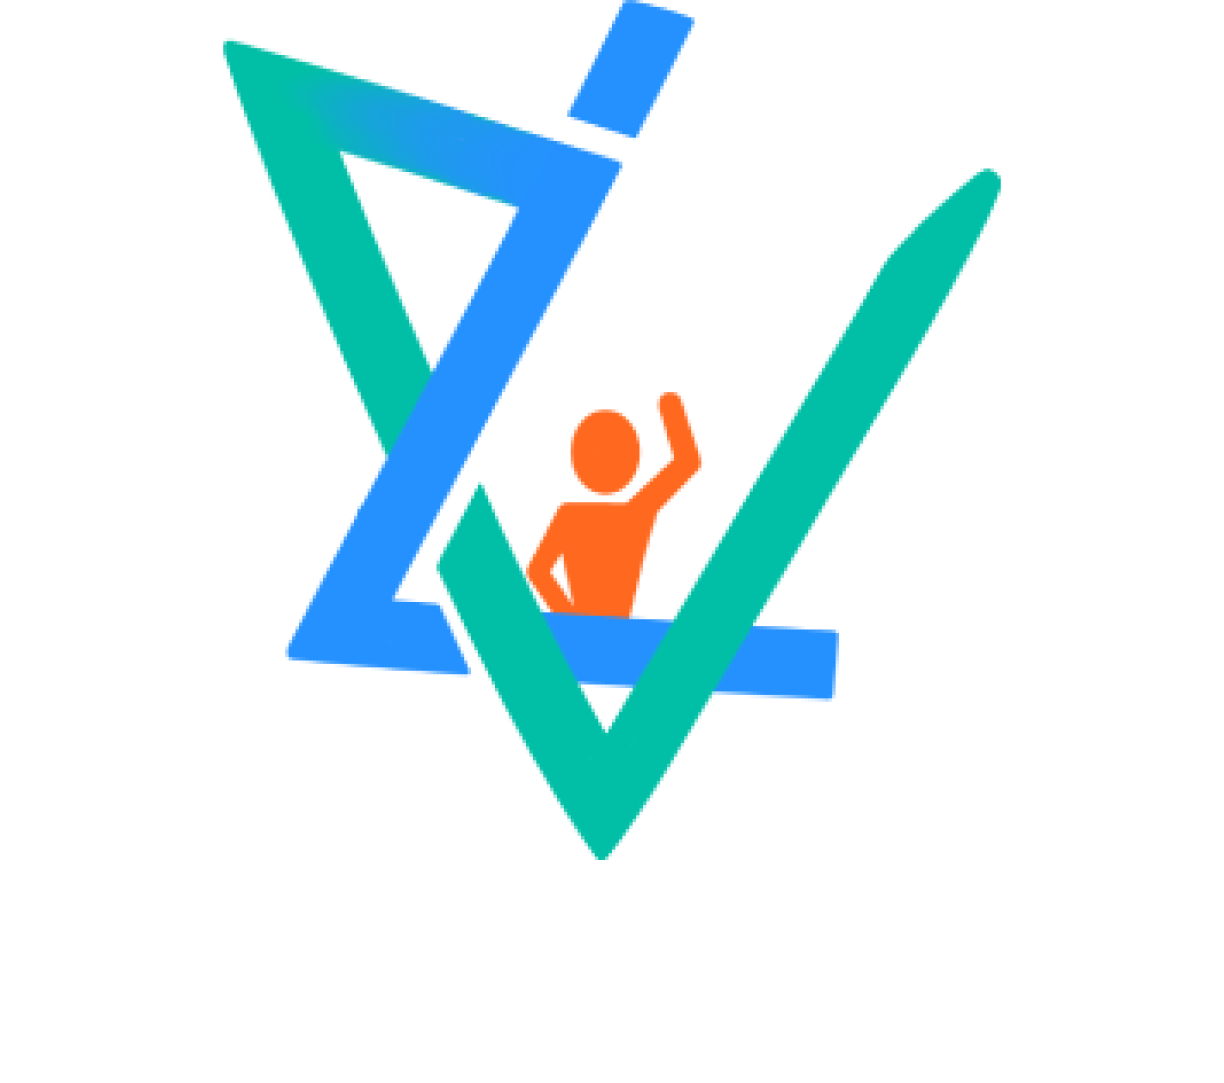 Main Veritas Learners Logo with white text